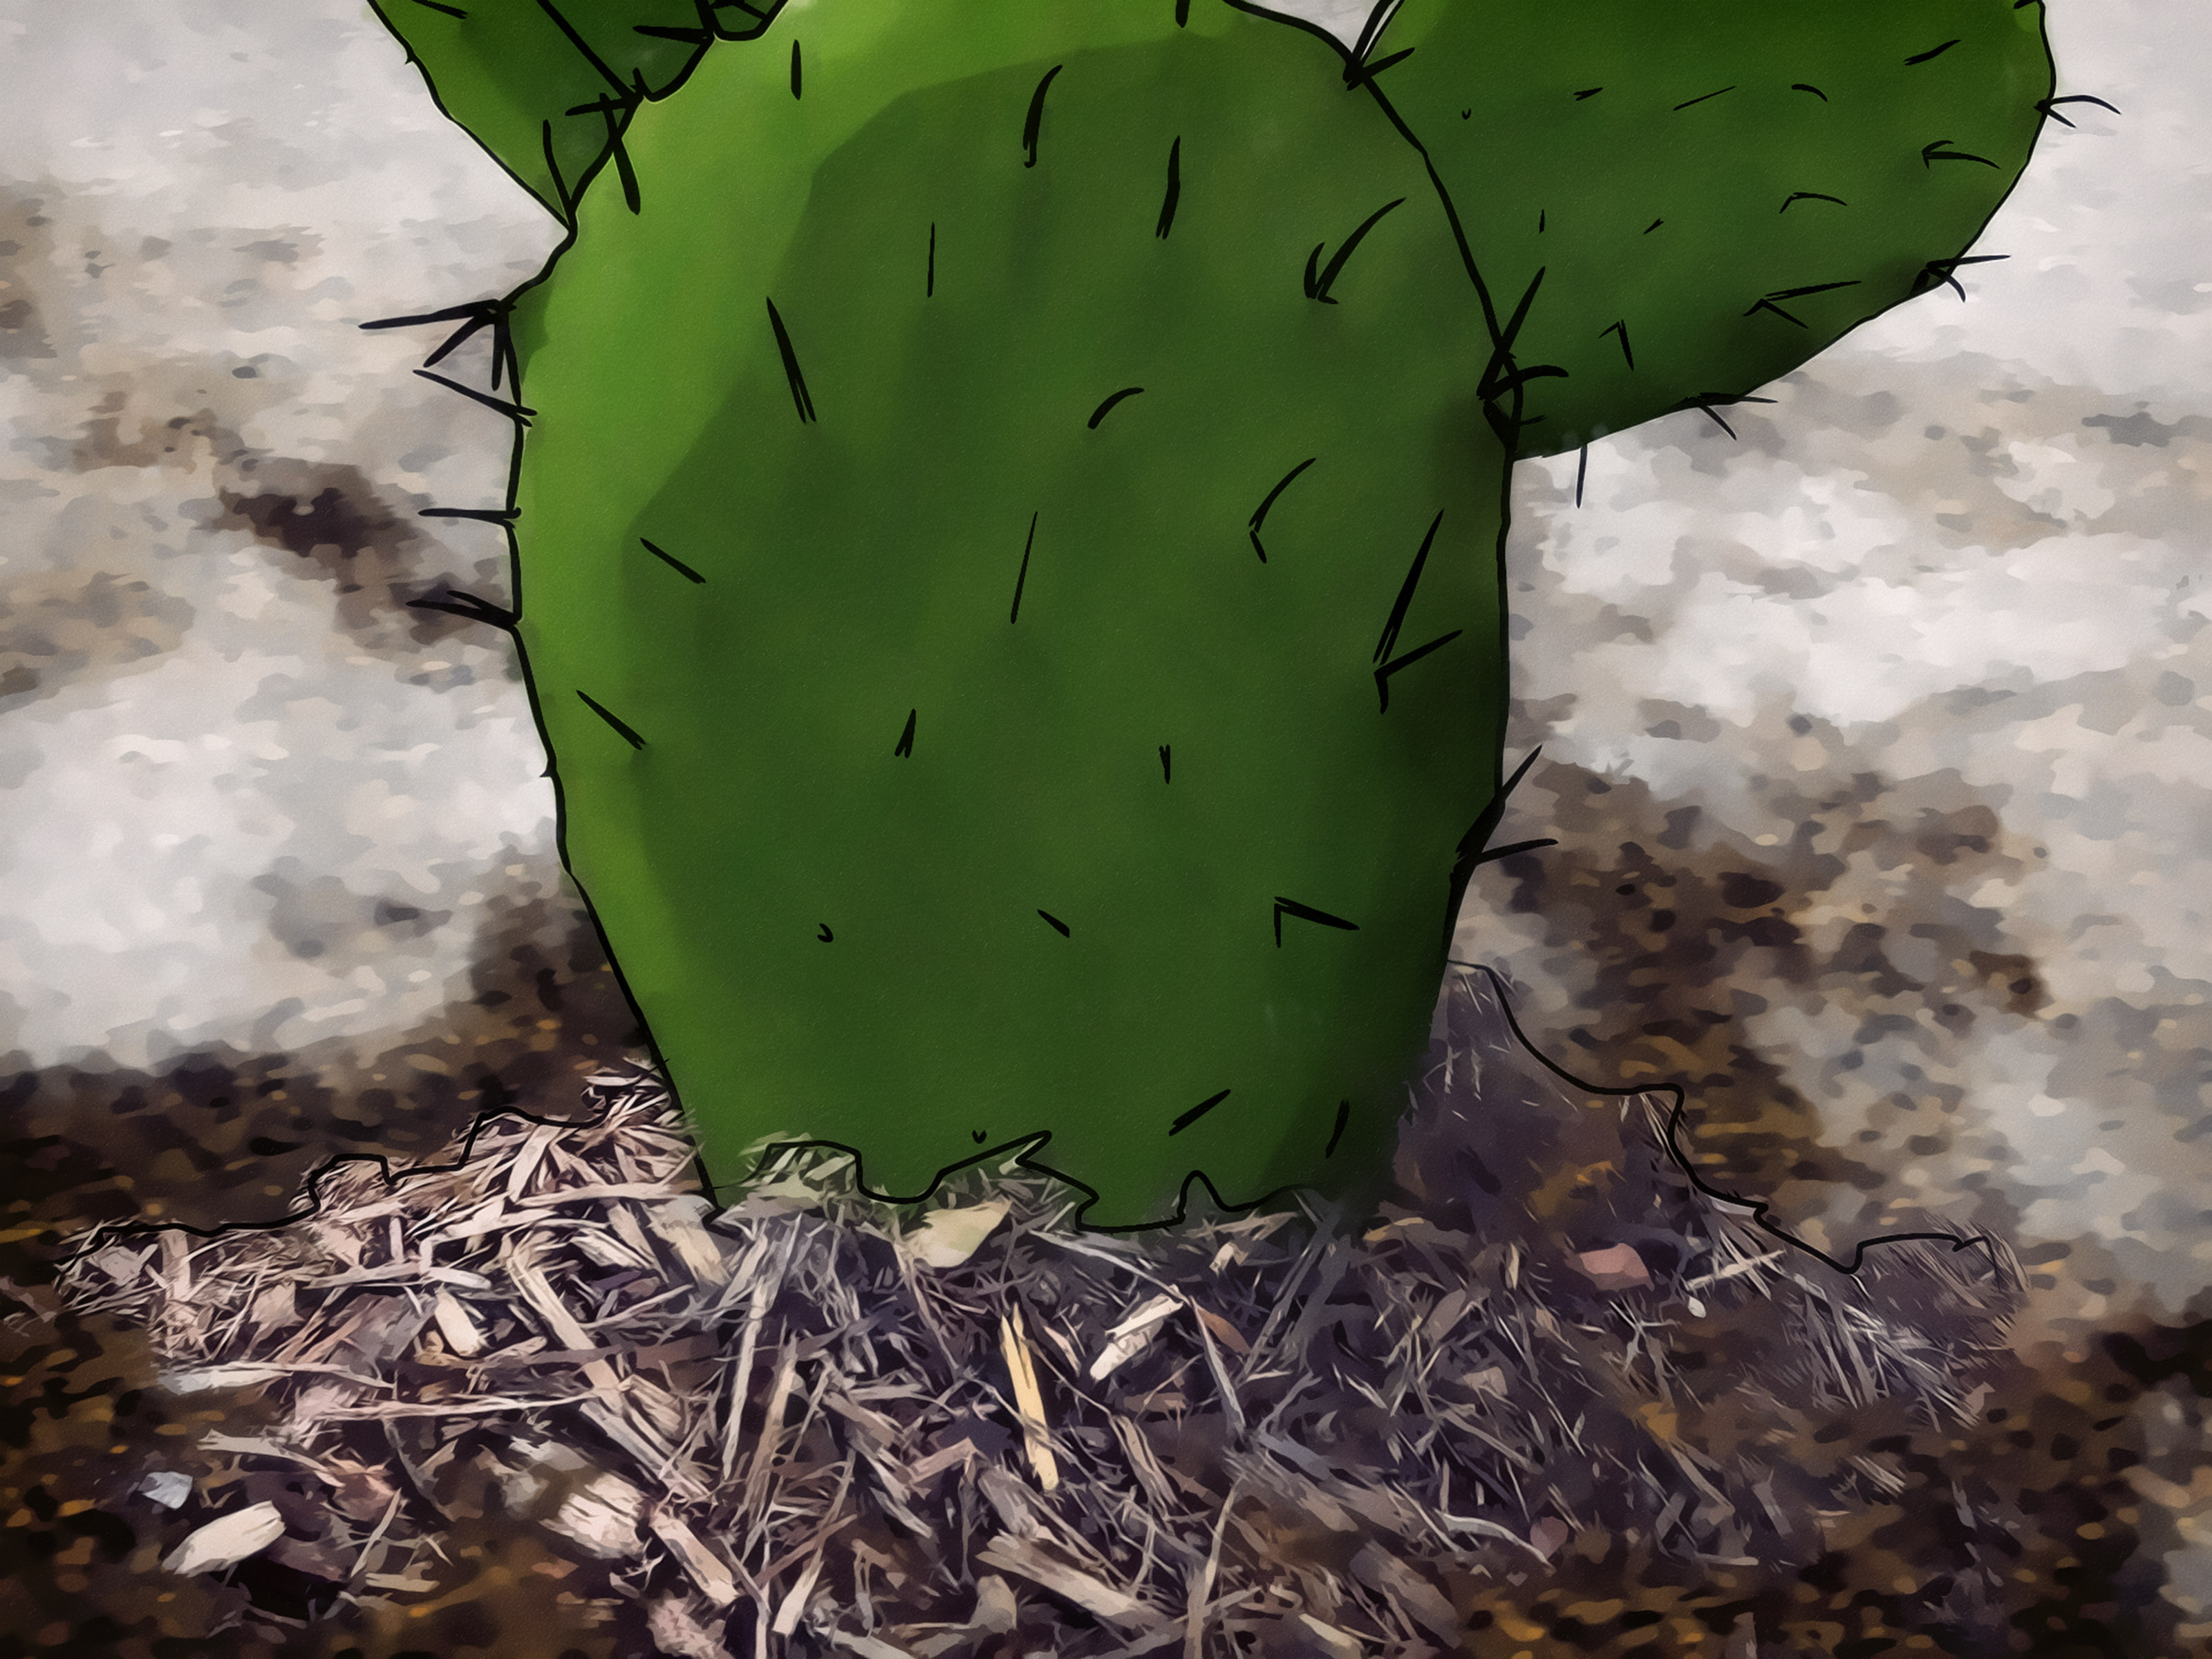 3 Ways to Grow Prickly Pears - wikiHow